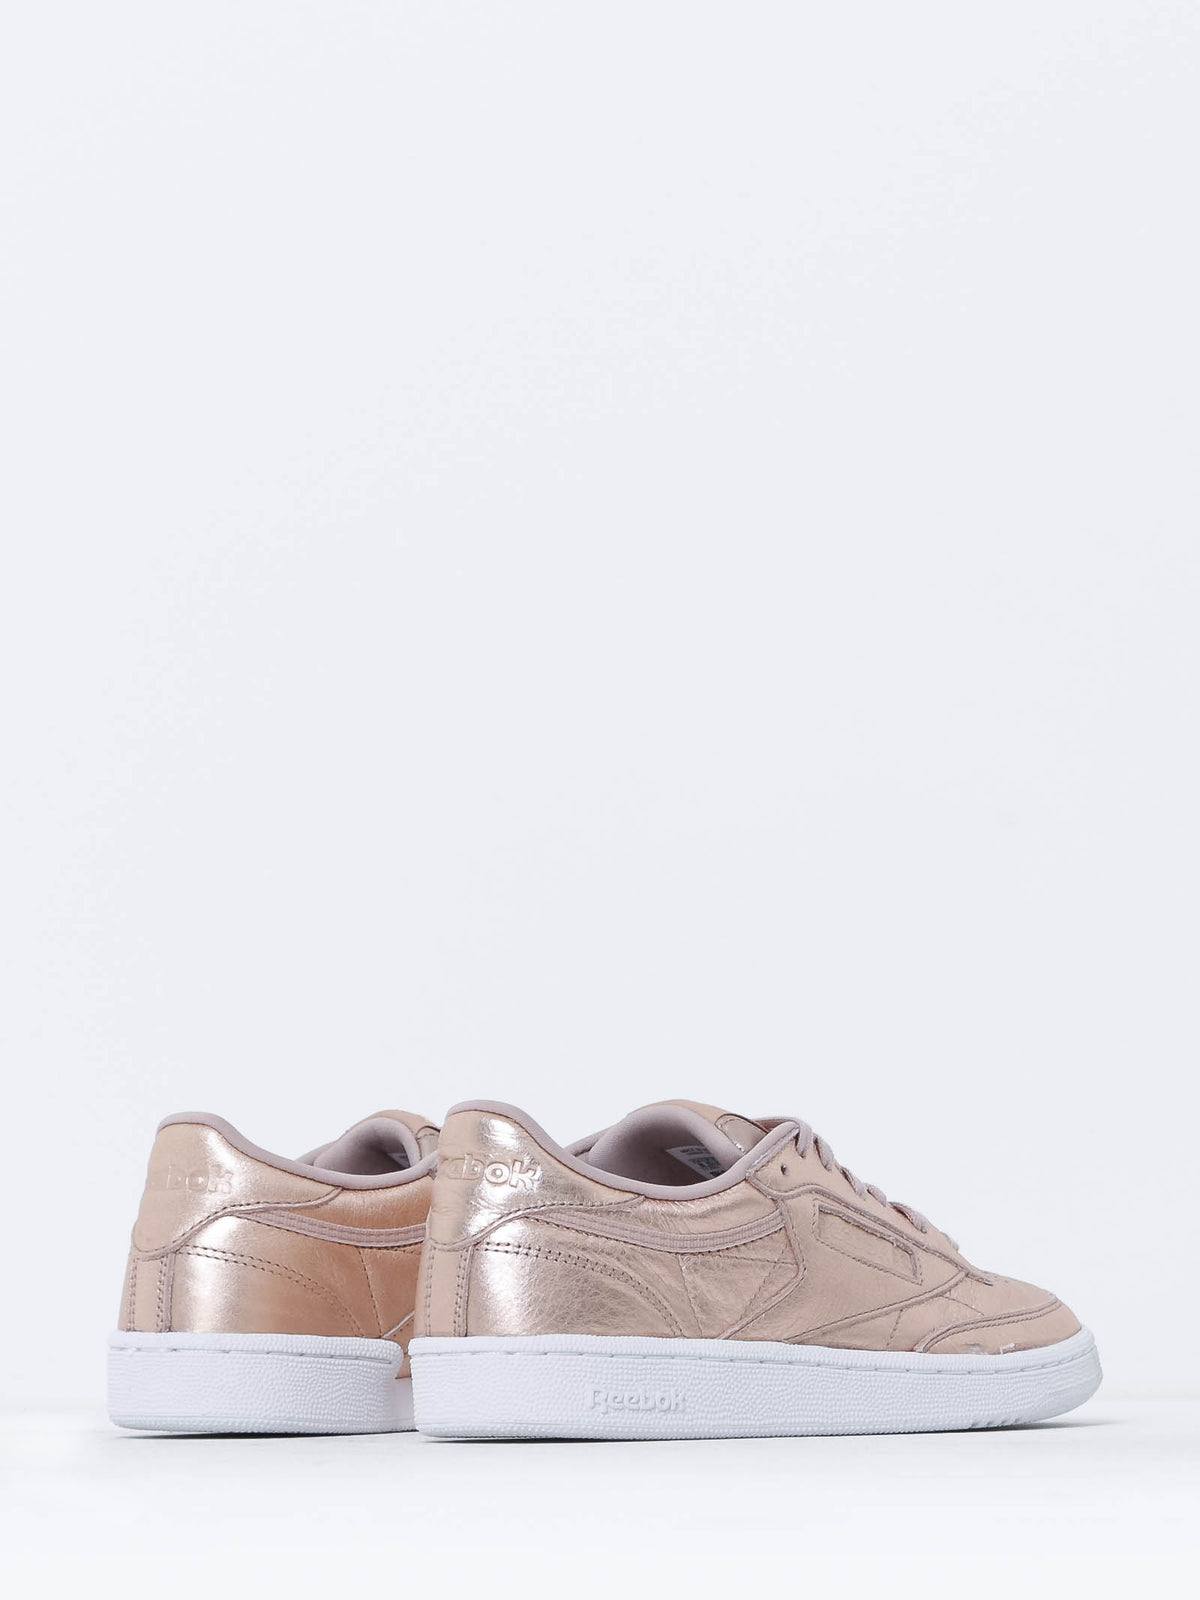 Womens Club C85 Melted Metal Sneakers in Metallaic Pearl Leather